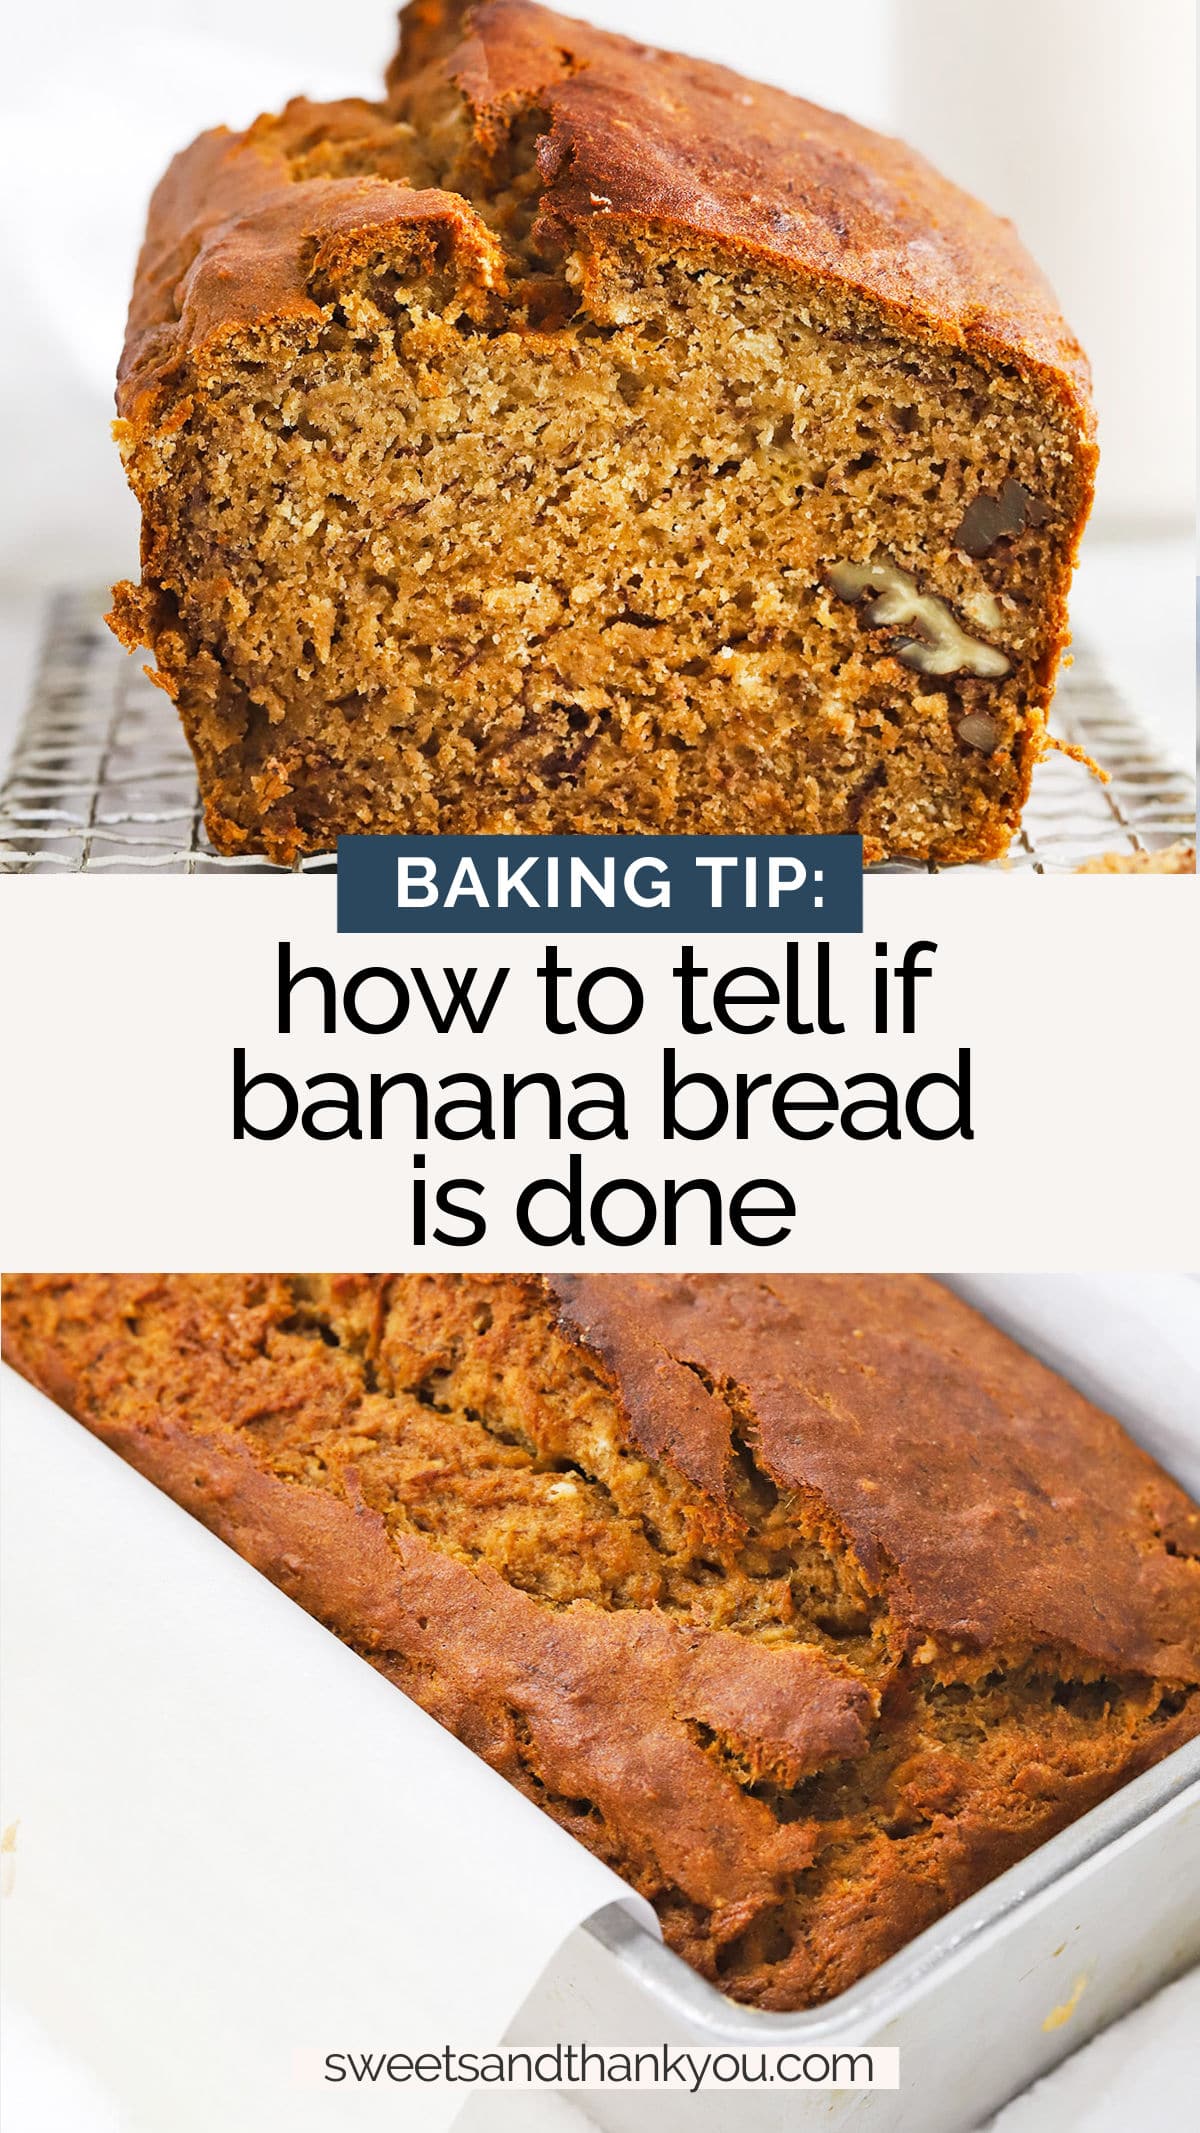 How To Tell When Banana Bread Is Done - How do you know your banana bread is done? We'll walk you through our tried & true tricks so you don't end up with under-baked banana bread again. // how to fix undercooked banana bread // how to tell if banana bread is done // how to tell if banana bread is cooked all the way through // baking tips // gluten free baking tips // banana bread tips // toothpick trick // how to tell if banana bread is cooked without a thermometer // 